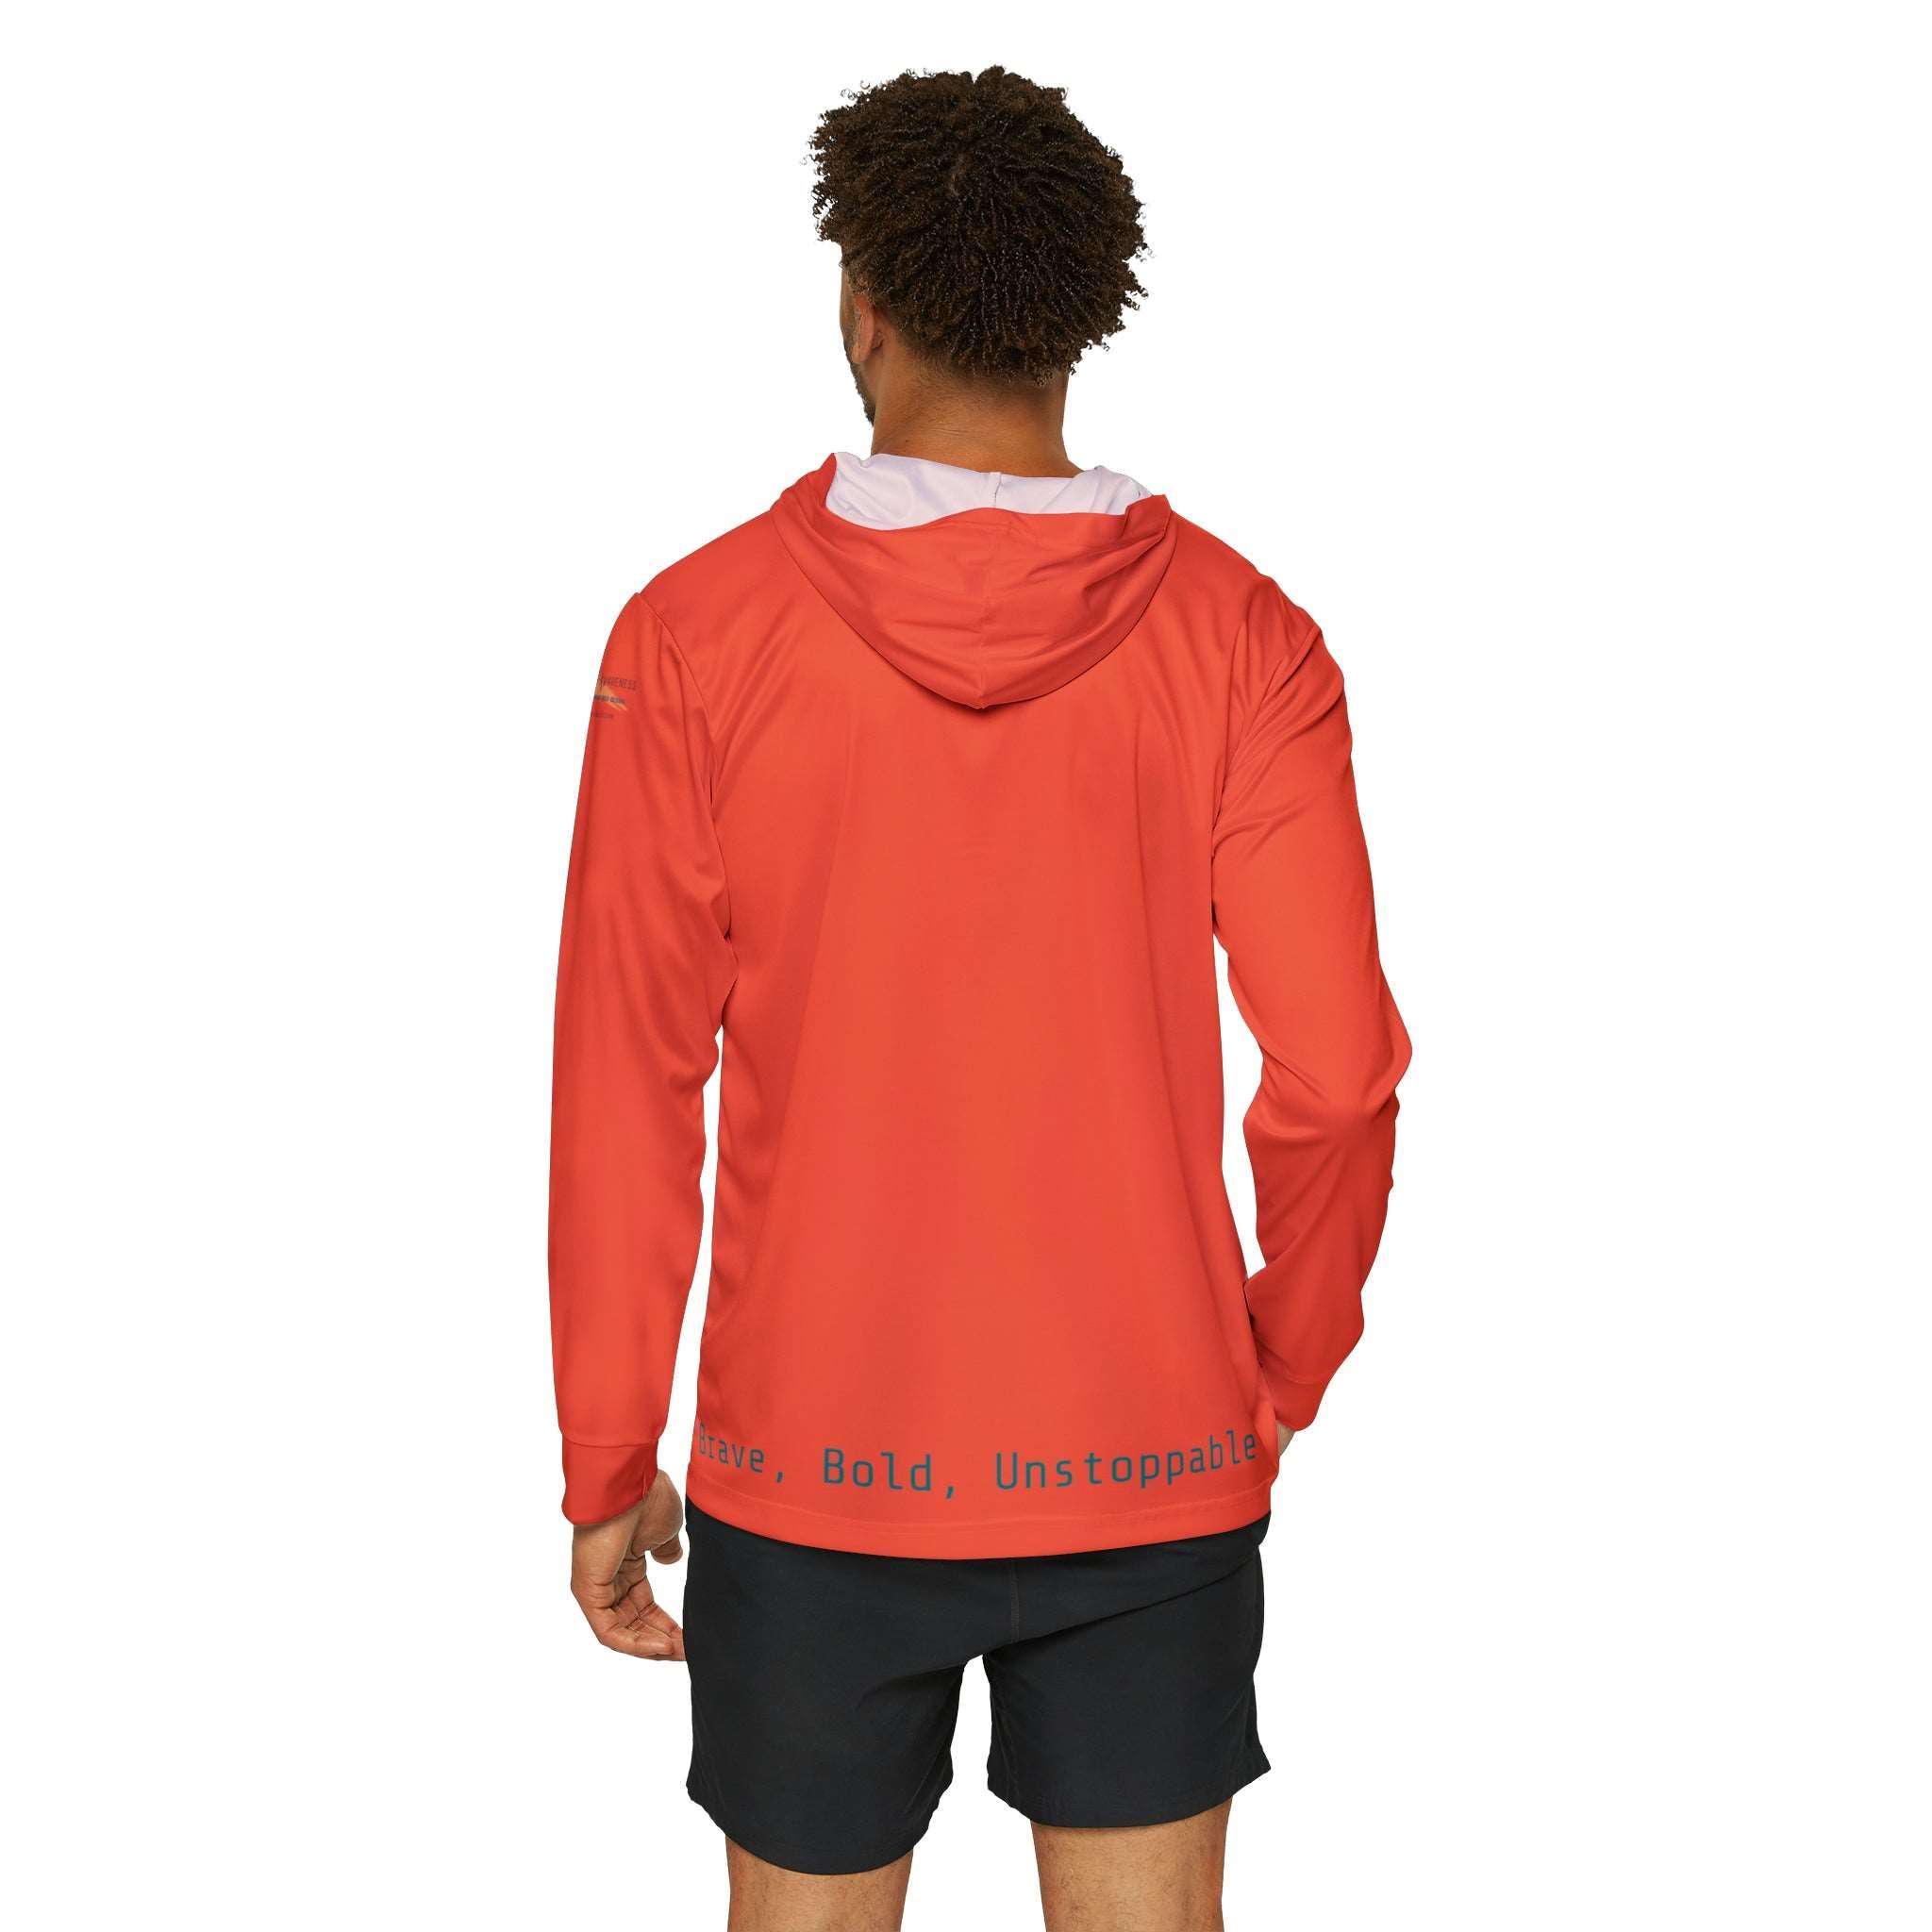 Driven Men's Sports Warmup Hoodie: Push Your Limits Activewear Durable Fabric Made in USA Men's Hoodie Mental Health Support Moisture-wicking Performance Apparel Quality Control Sports Warmup UPF 50+ All Over Prints 6508794940106629859_2048_0673e108-4e20-48c4-9eee-39f2c3fc19f0 Printify